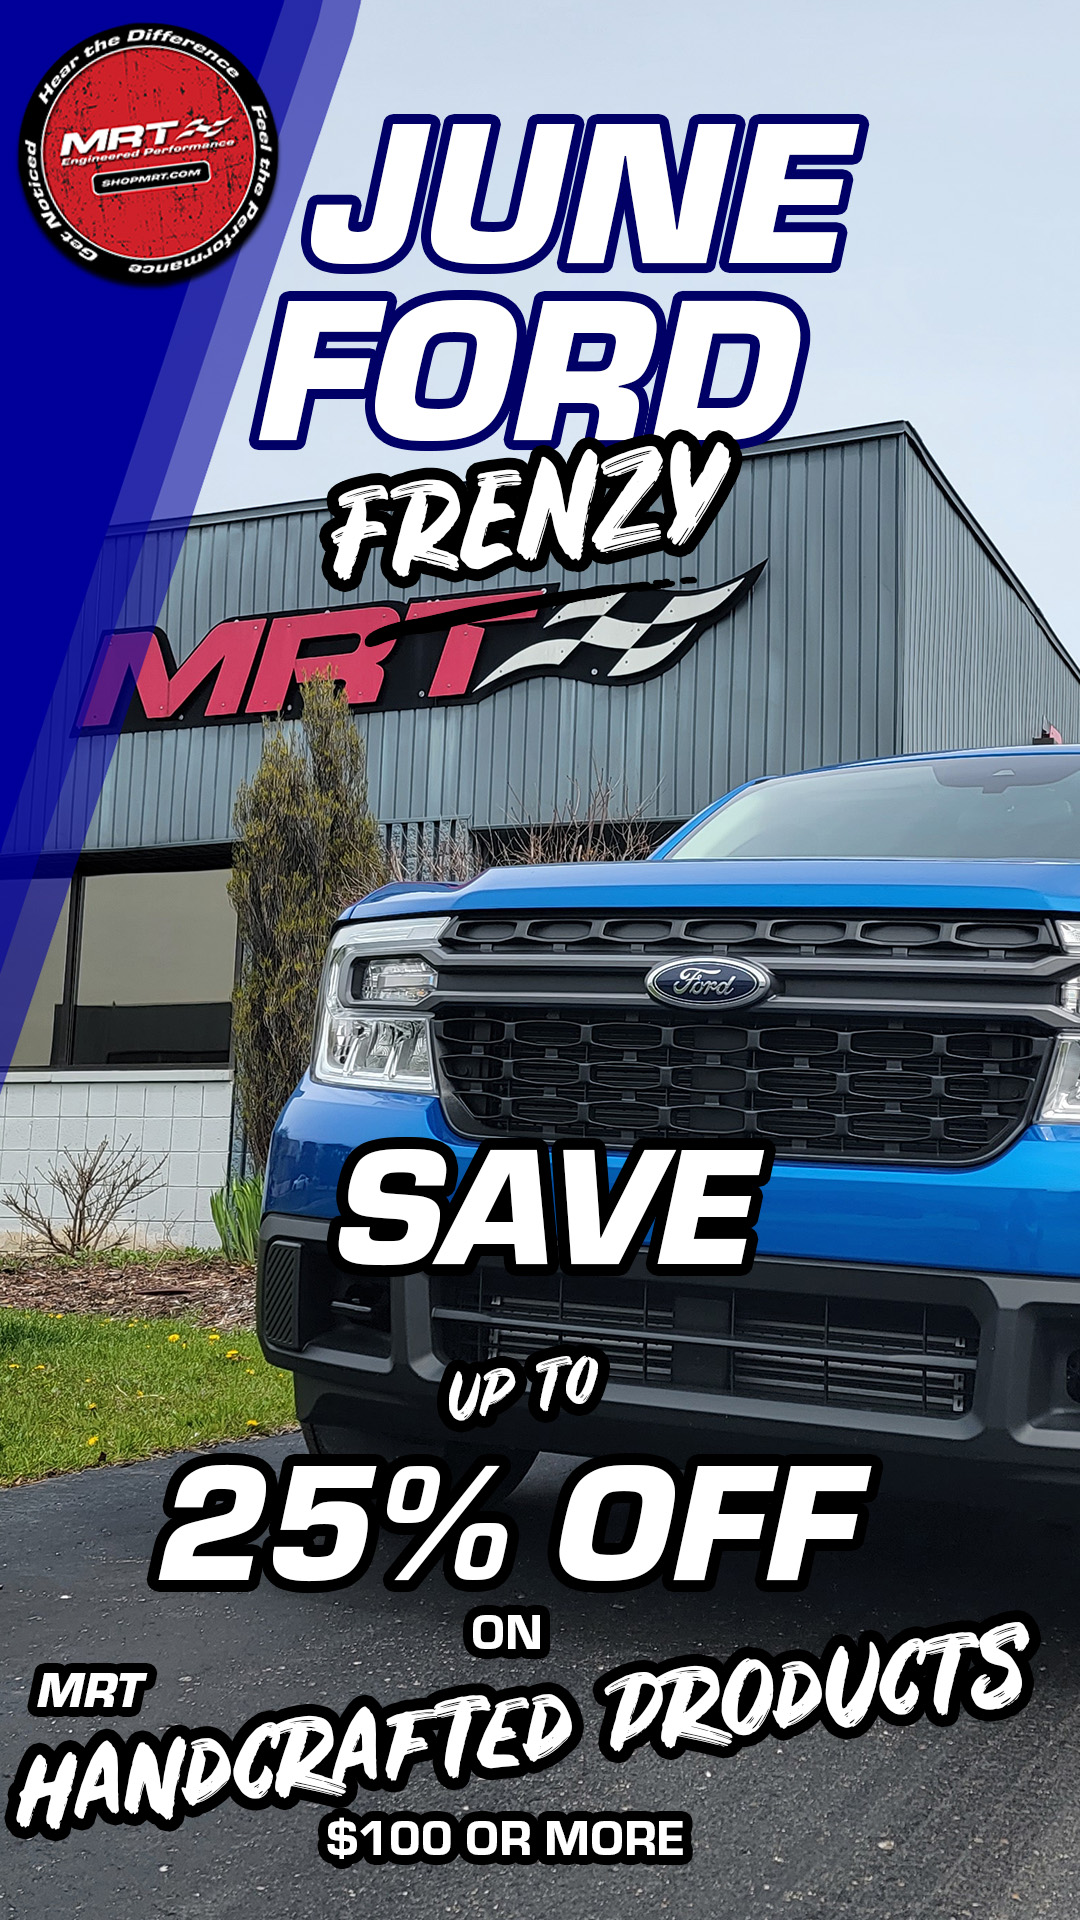 Ford Maverick June Ford Frenzy Sale: Upgrade Your Ford Maverick with MRT Performance Exhaust and Hood Strut Kits! June_Ford_Frenzy Maverick